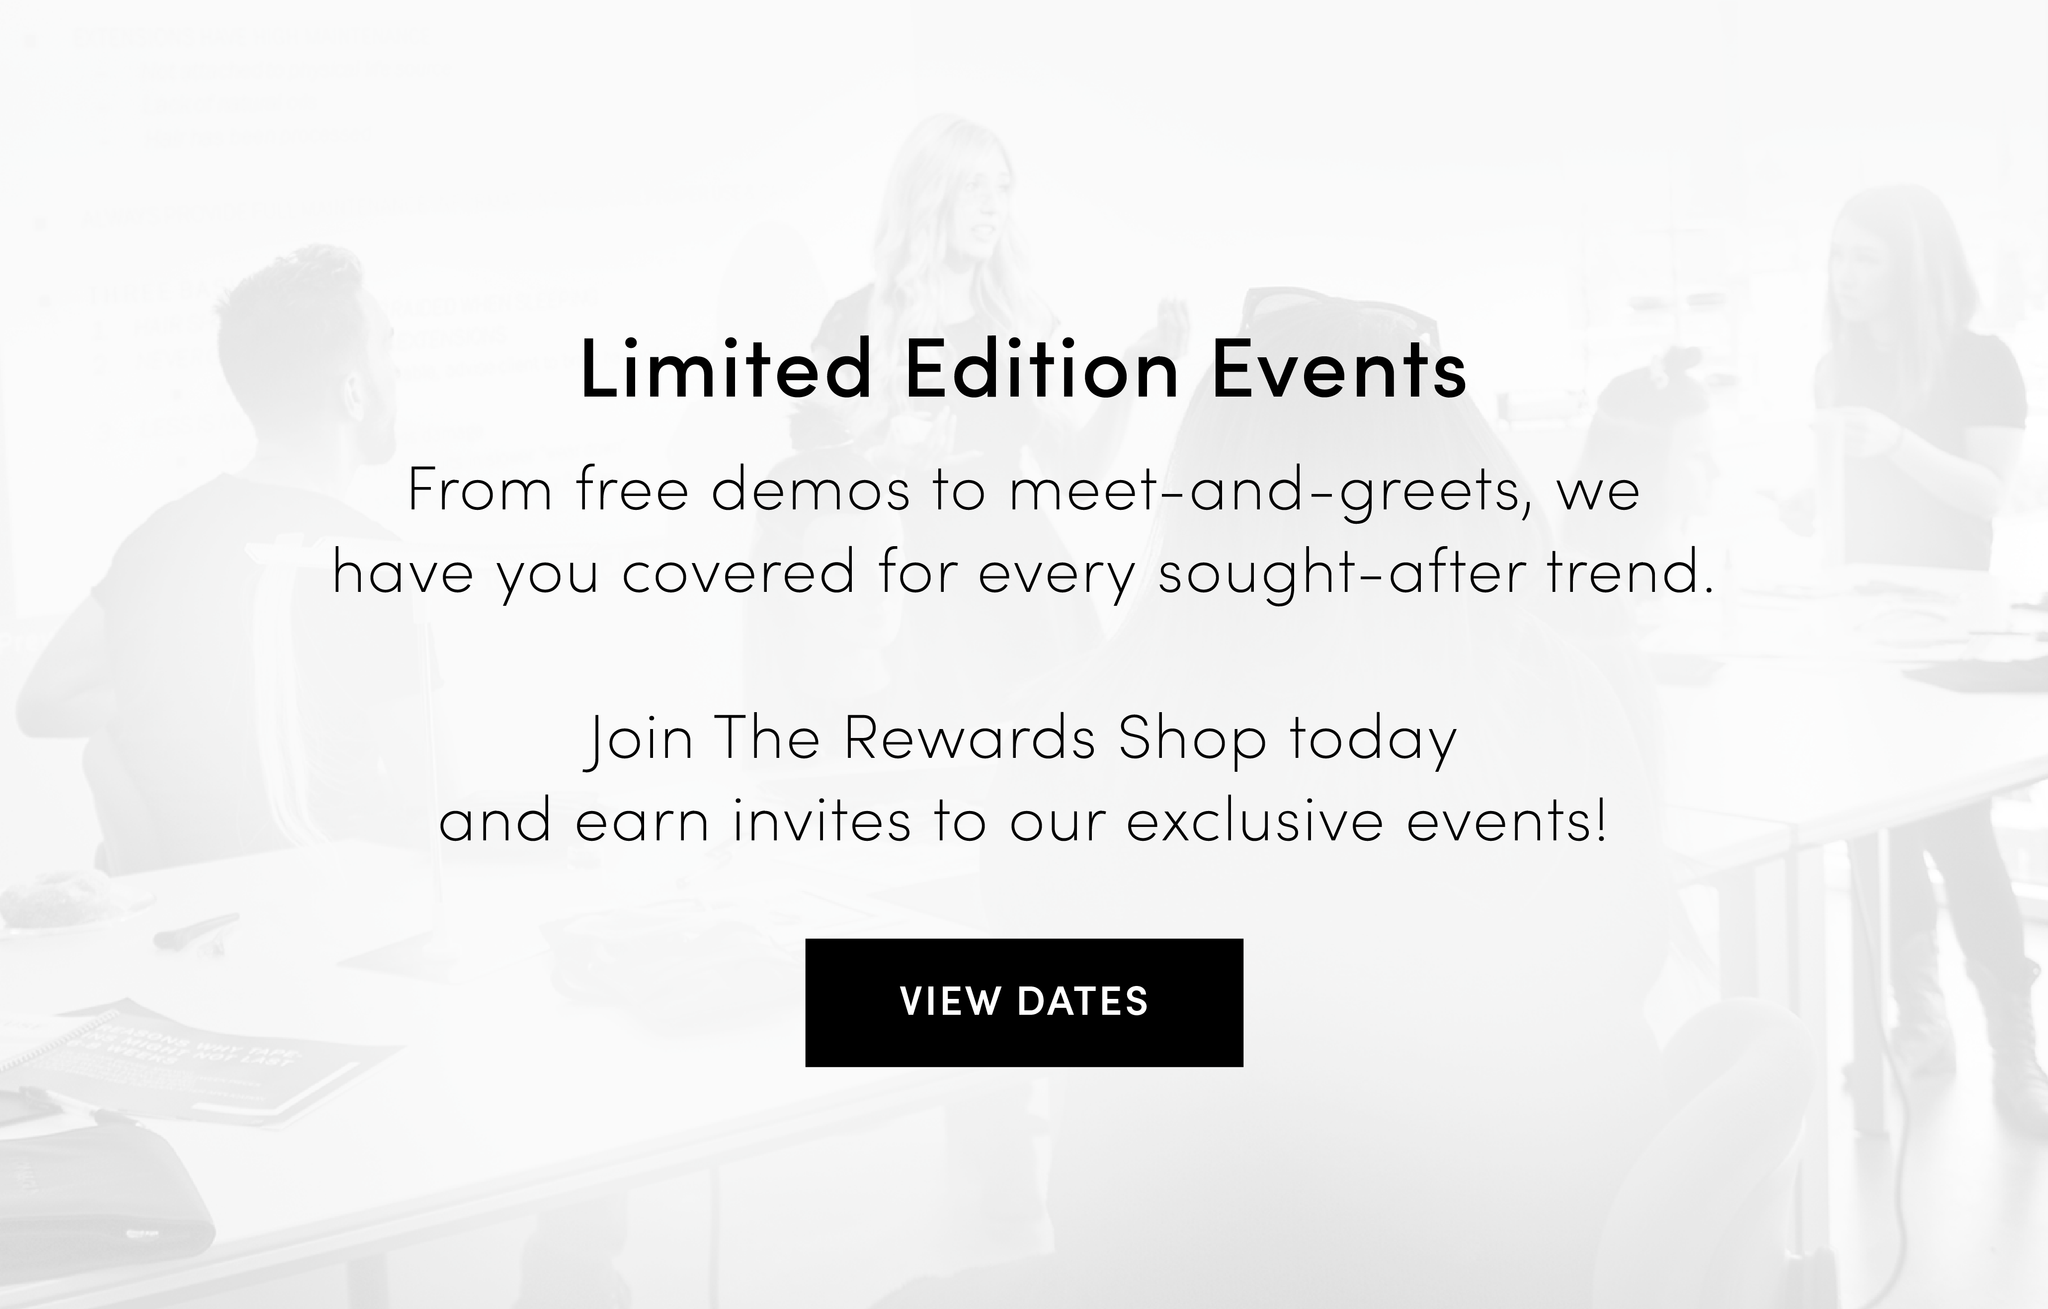 Lead Educator is teaching a hair extension class with banner that reads "Limited Edition Events From free demos to meet and greets, we have you covered for every sought after trend. Join The Rewards Shop today and earn invites to our exclusive events"